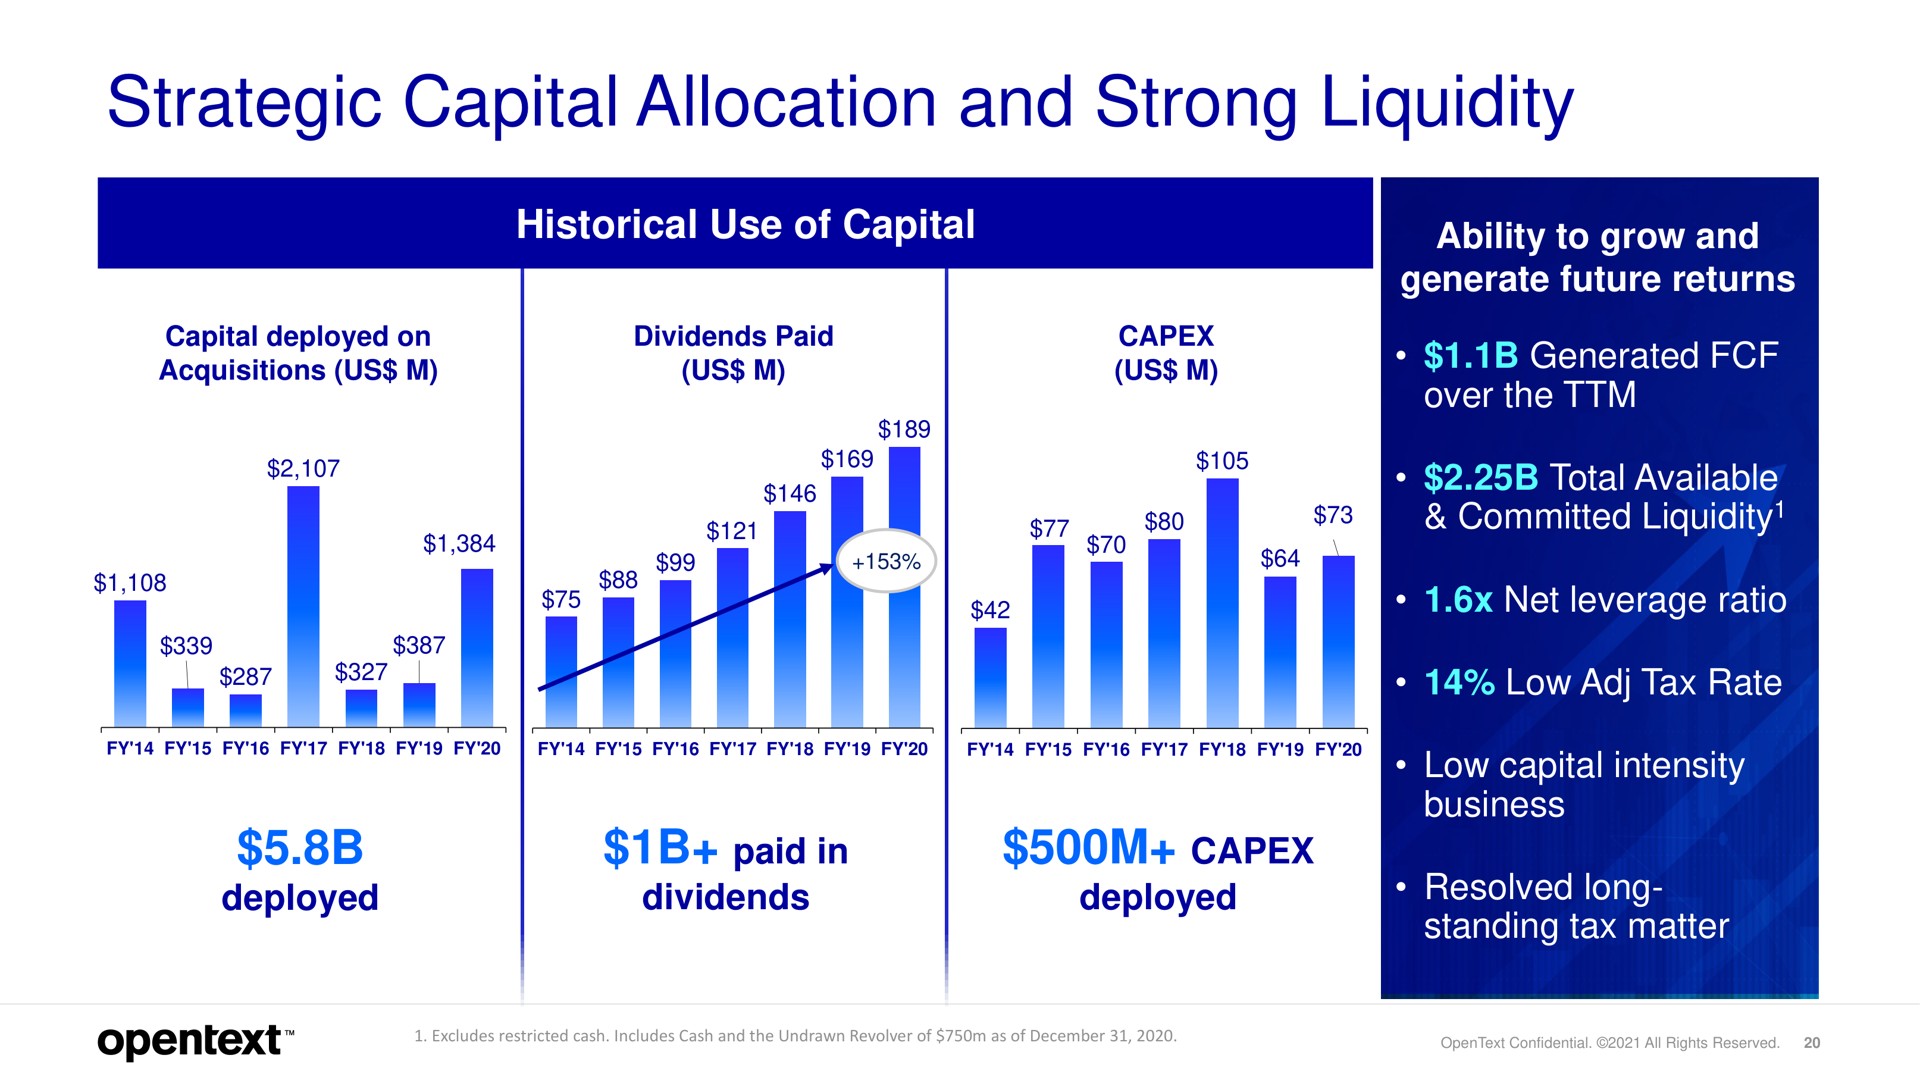 strategic capital allocation and strong liquidity | OpenText